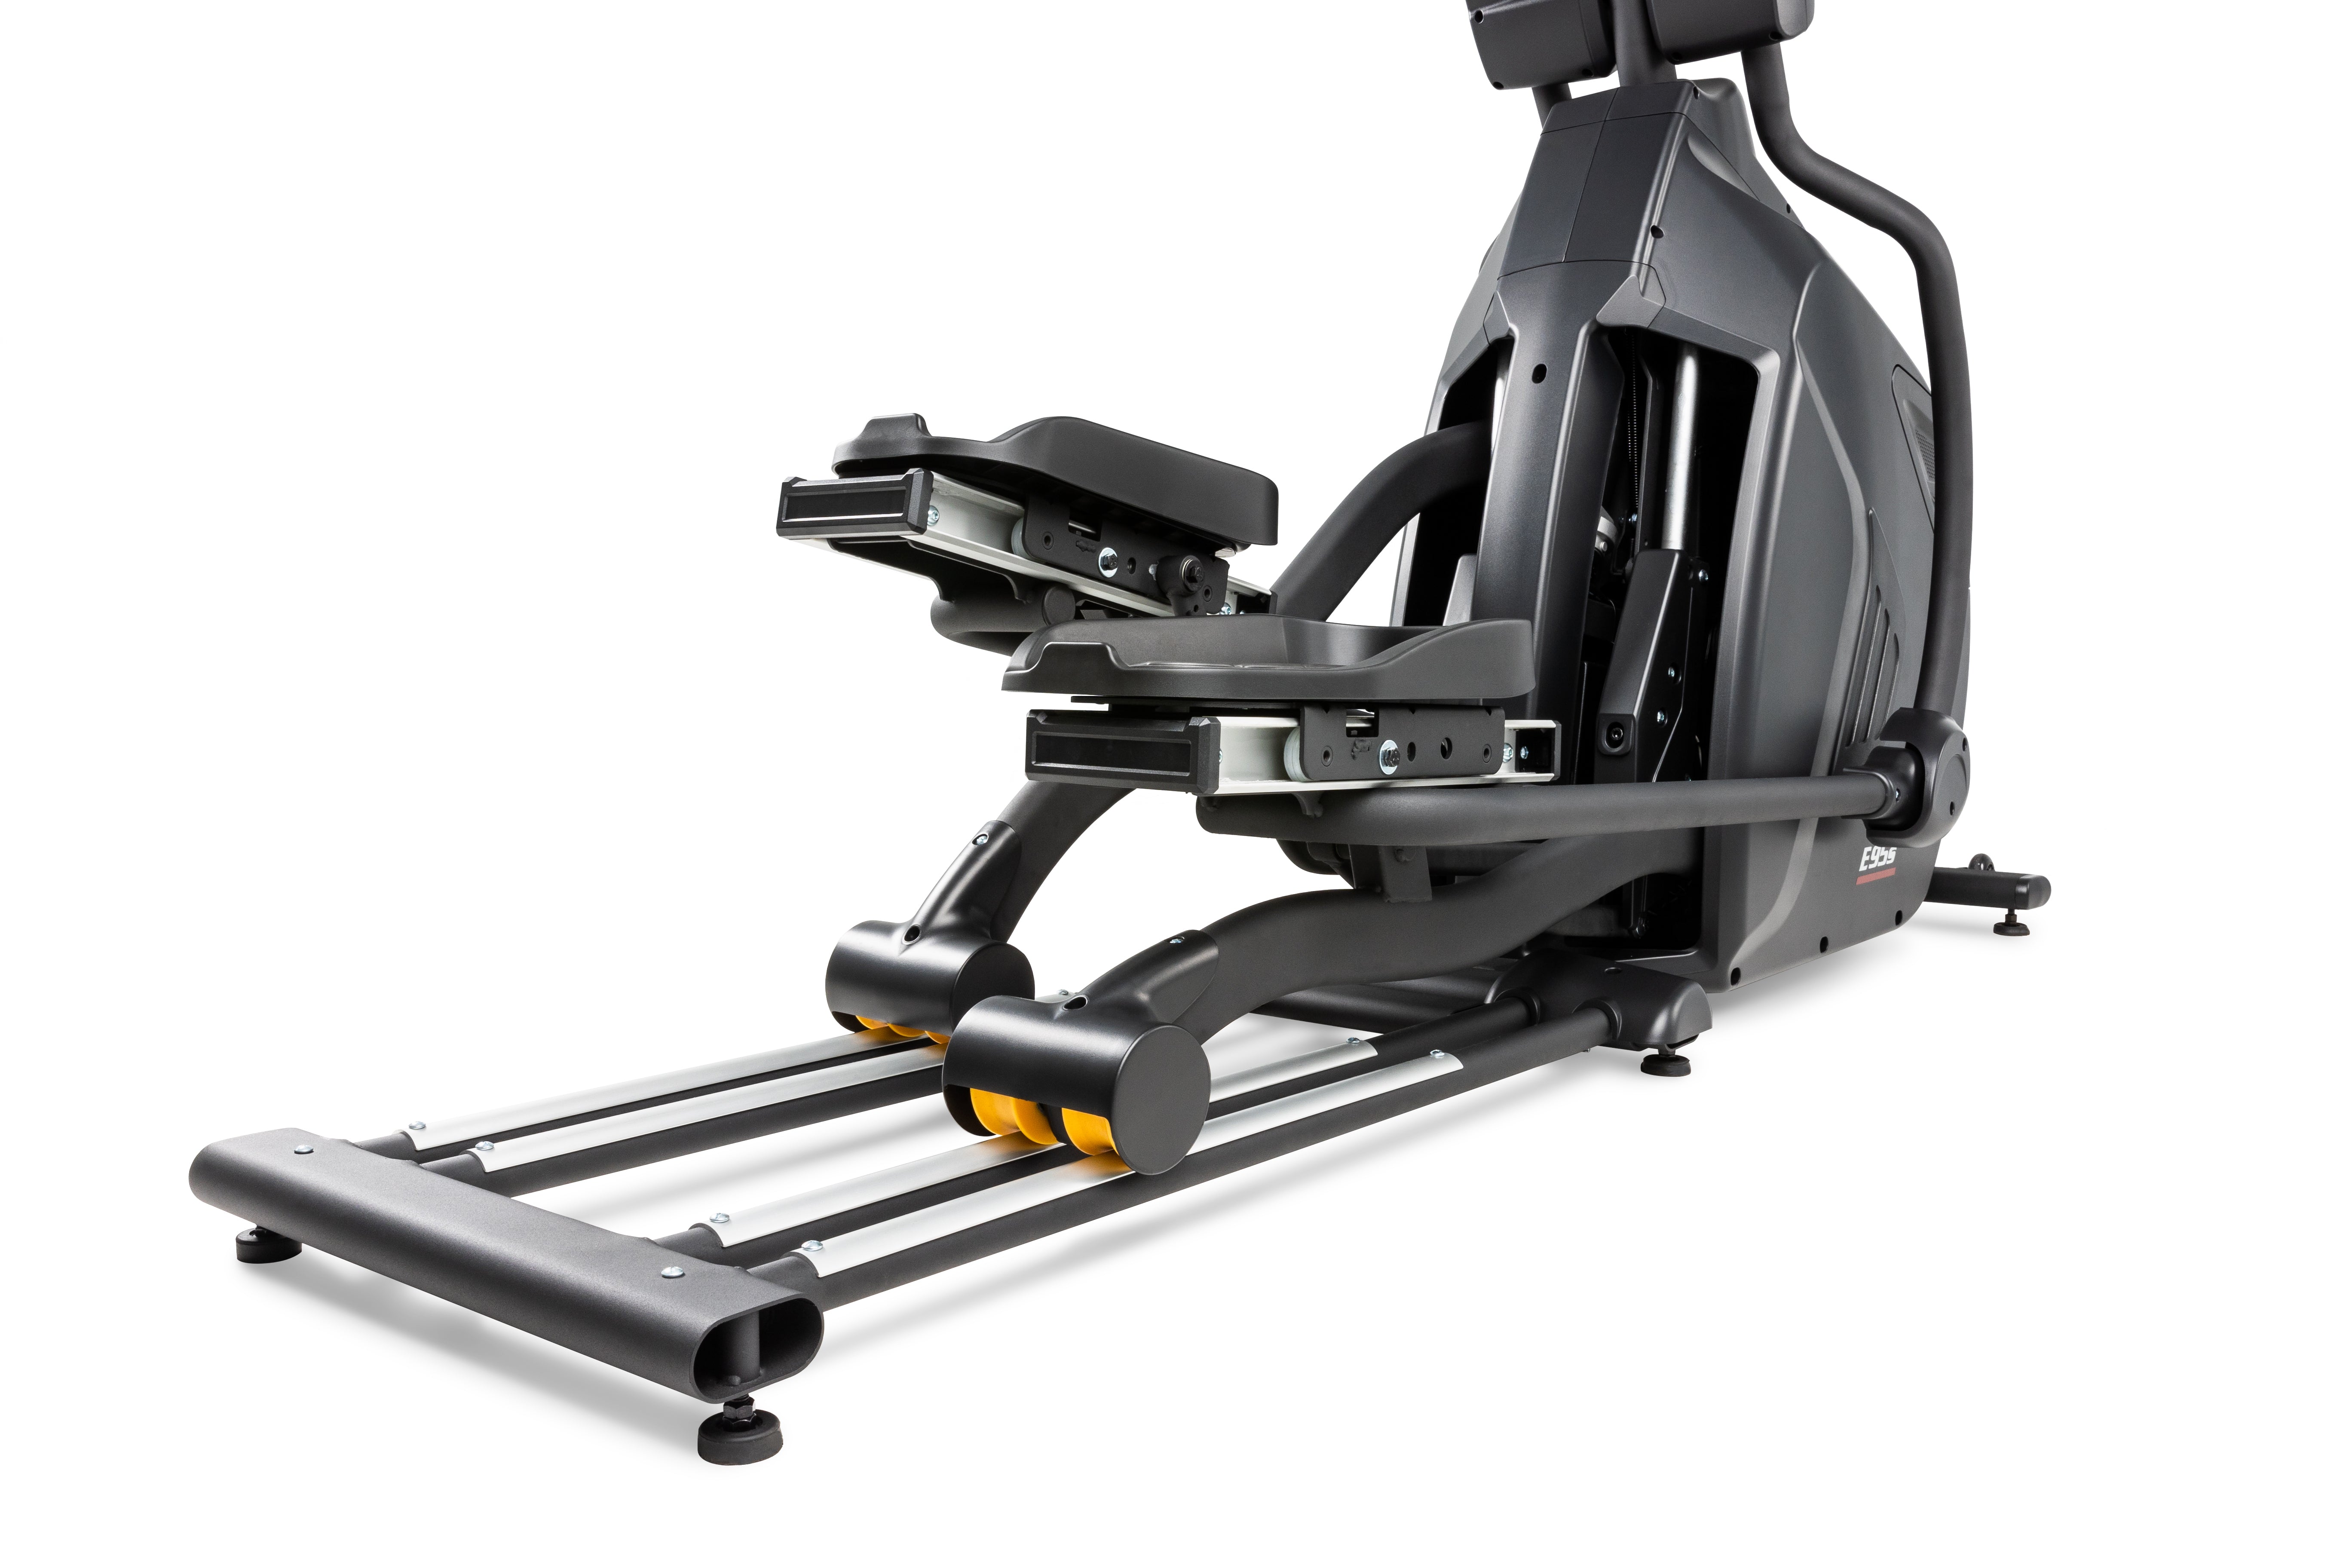 Side profile of the Sole E95S elliptical machine showcasing the foot pedals, arm handles, and rear housing unit with logo.